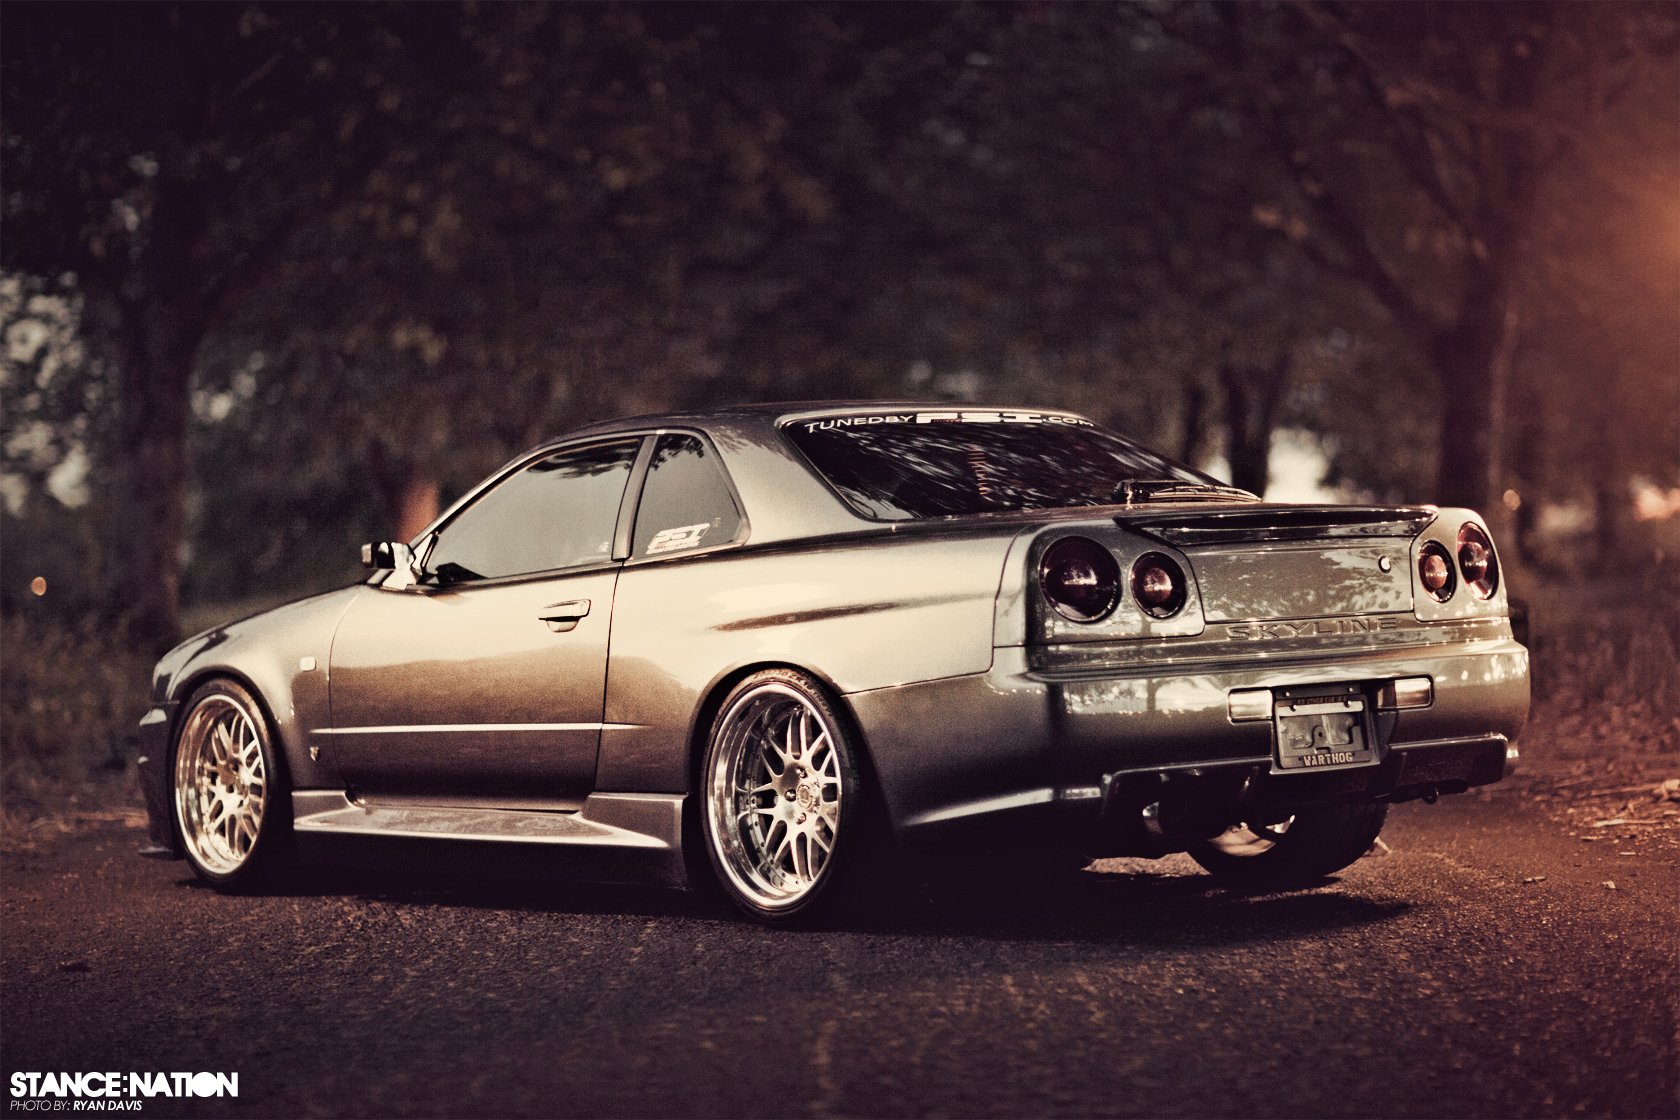 R34 Nissan Skyline Gt R Custom Tuning Wallpapers Hd Desktop And Mobile Backgrounds